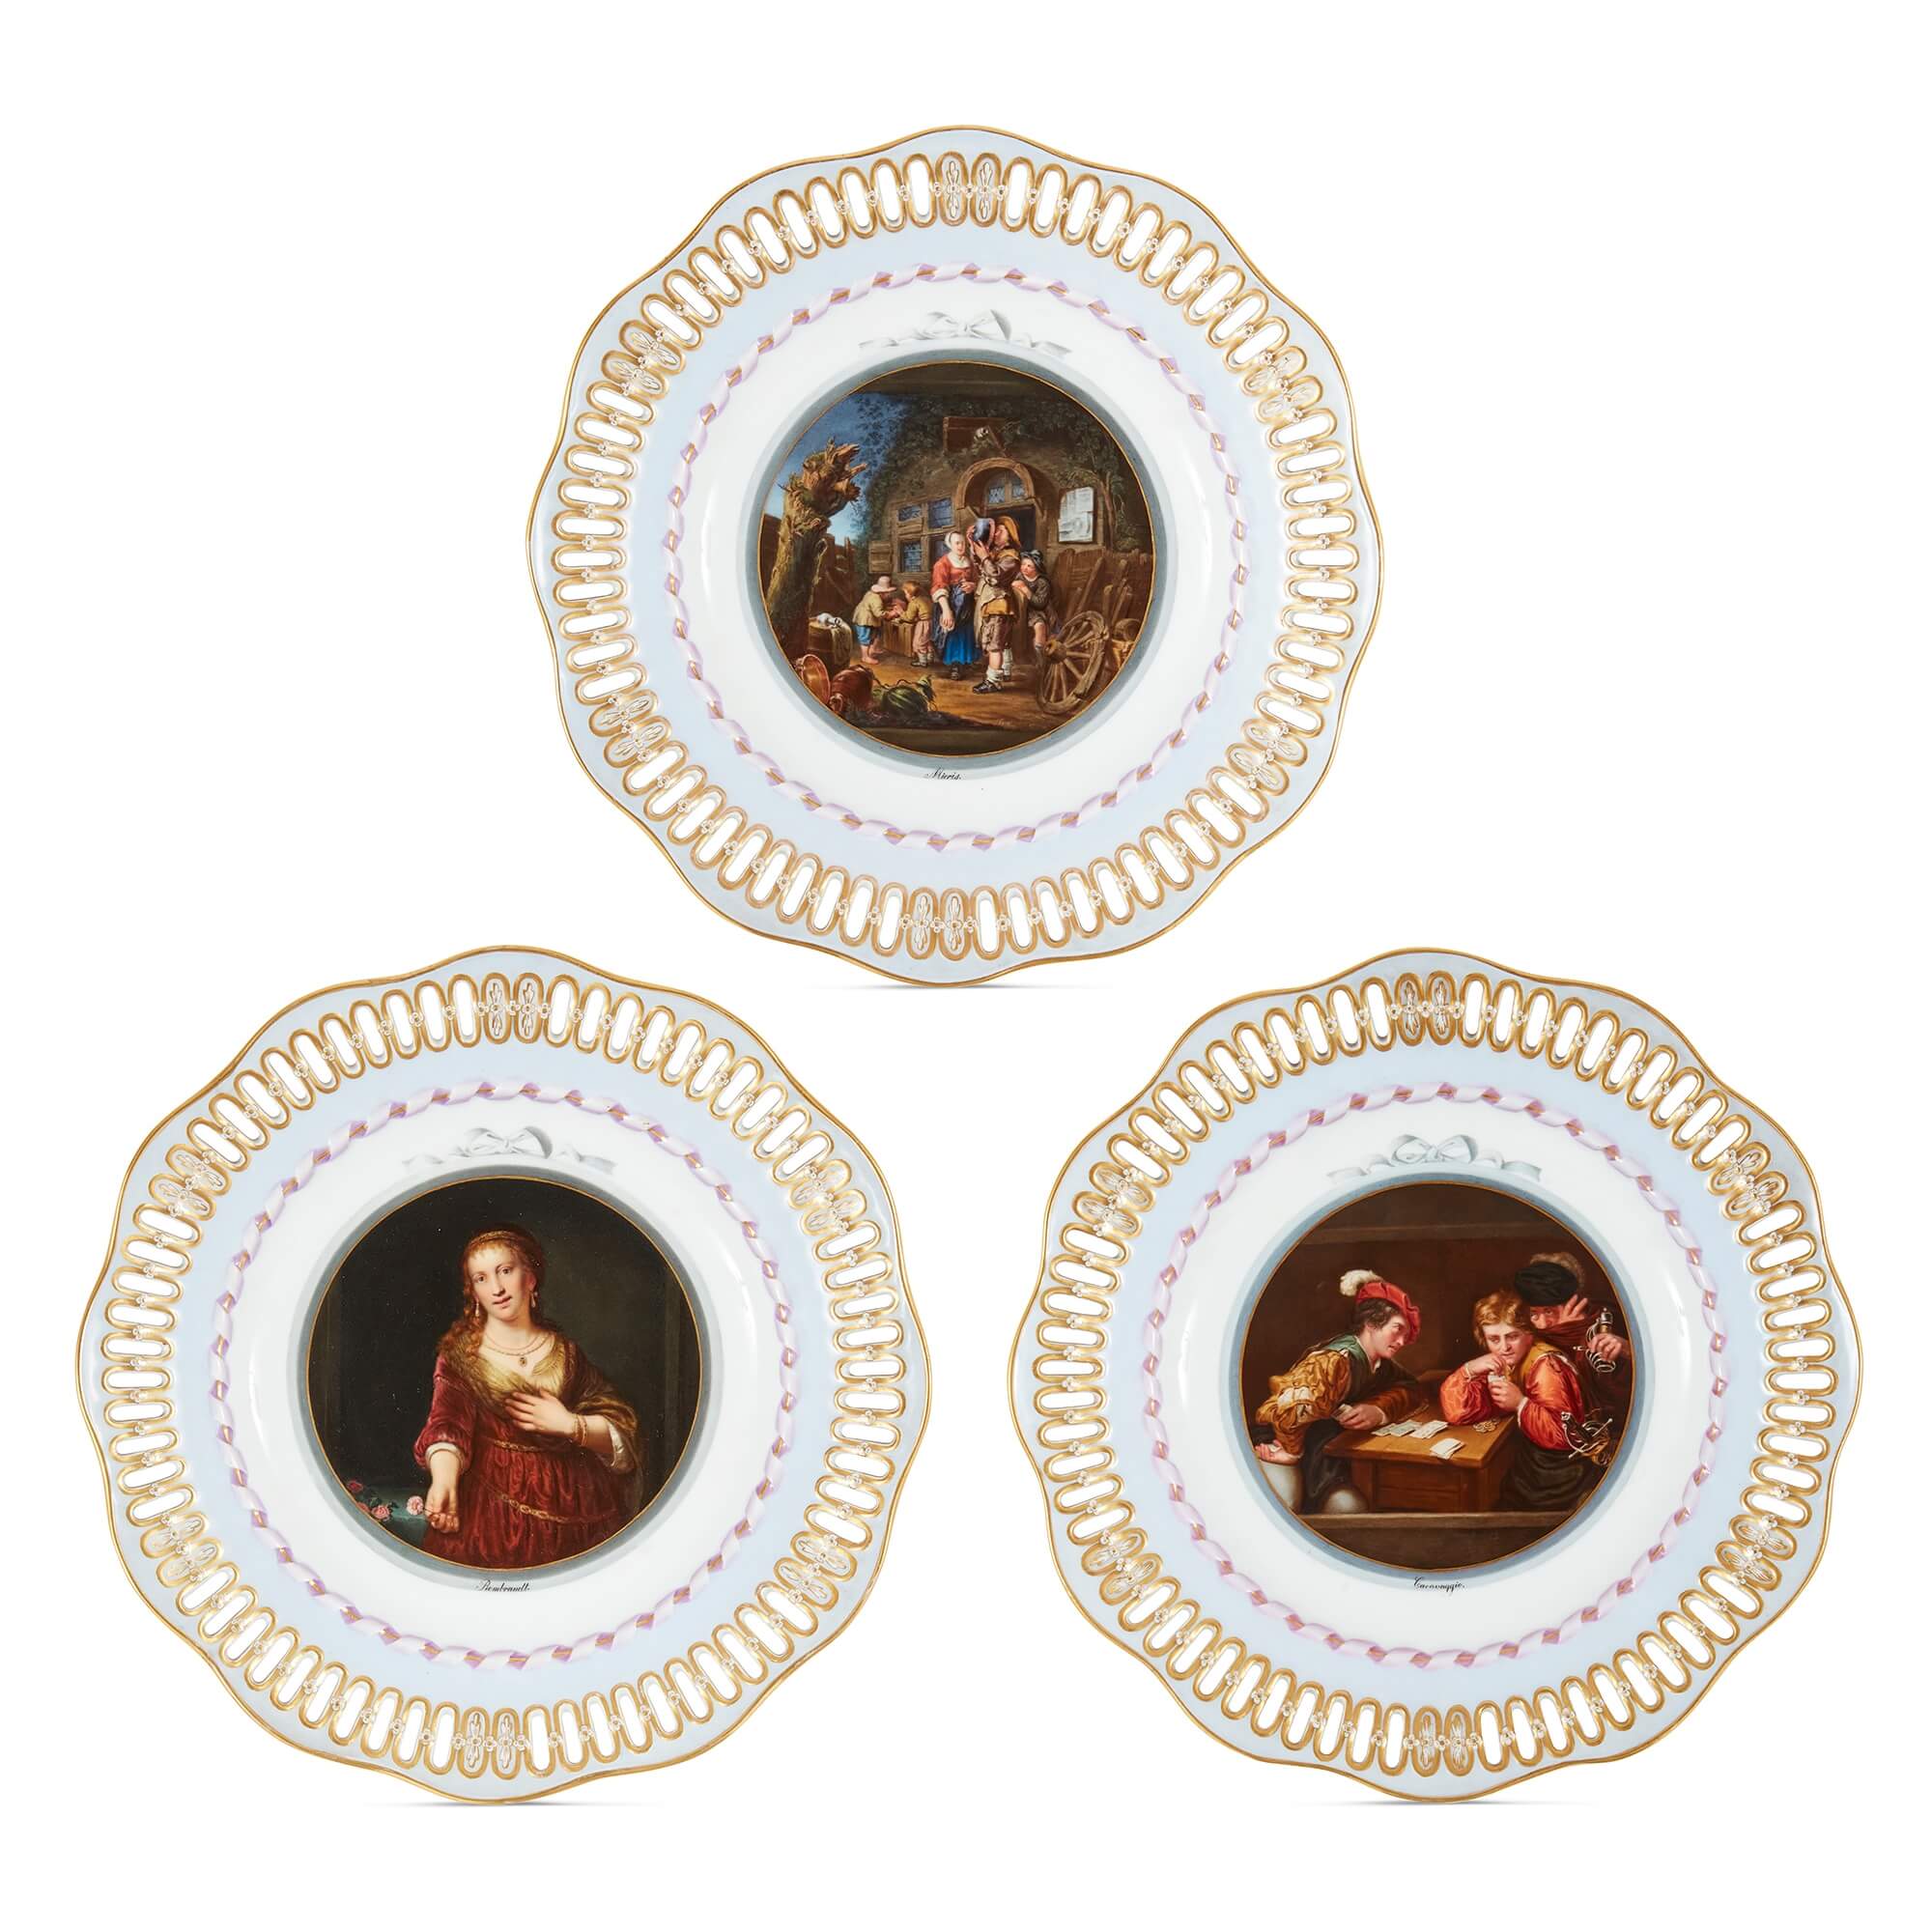 Three Meissen Porcelain Plates Showing Old Master Paintings For Sale